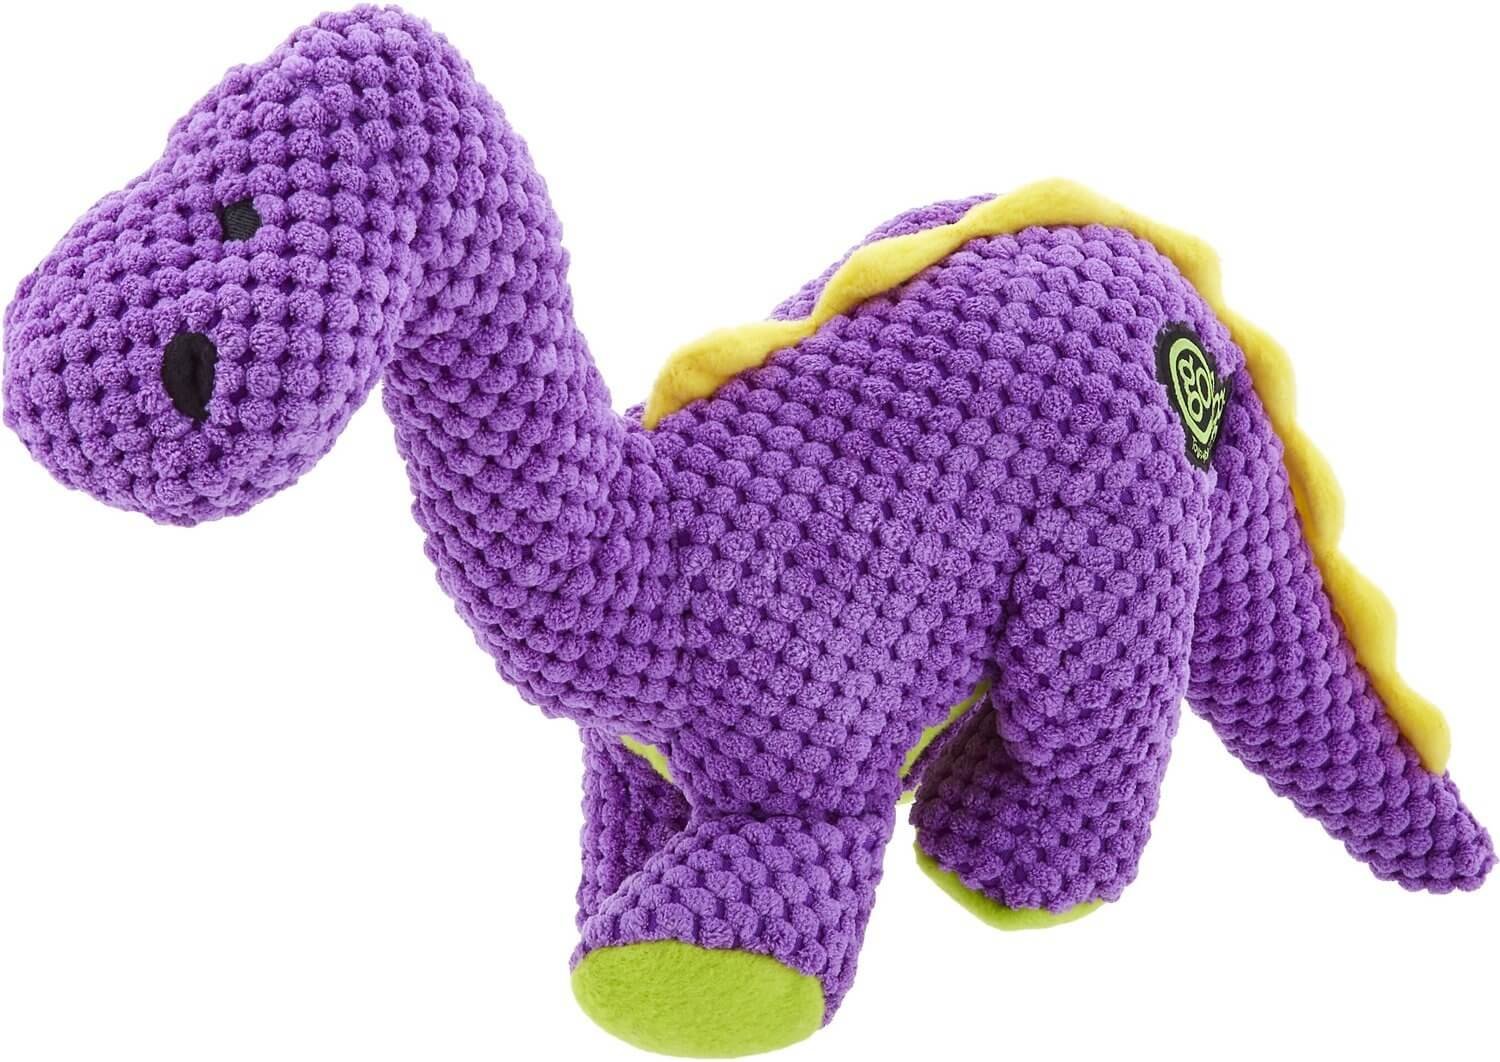 Features of the Extreme Dino Dog Toy